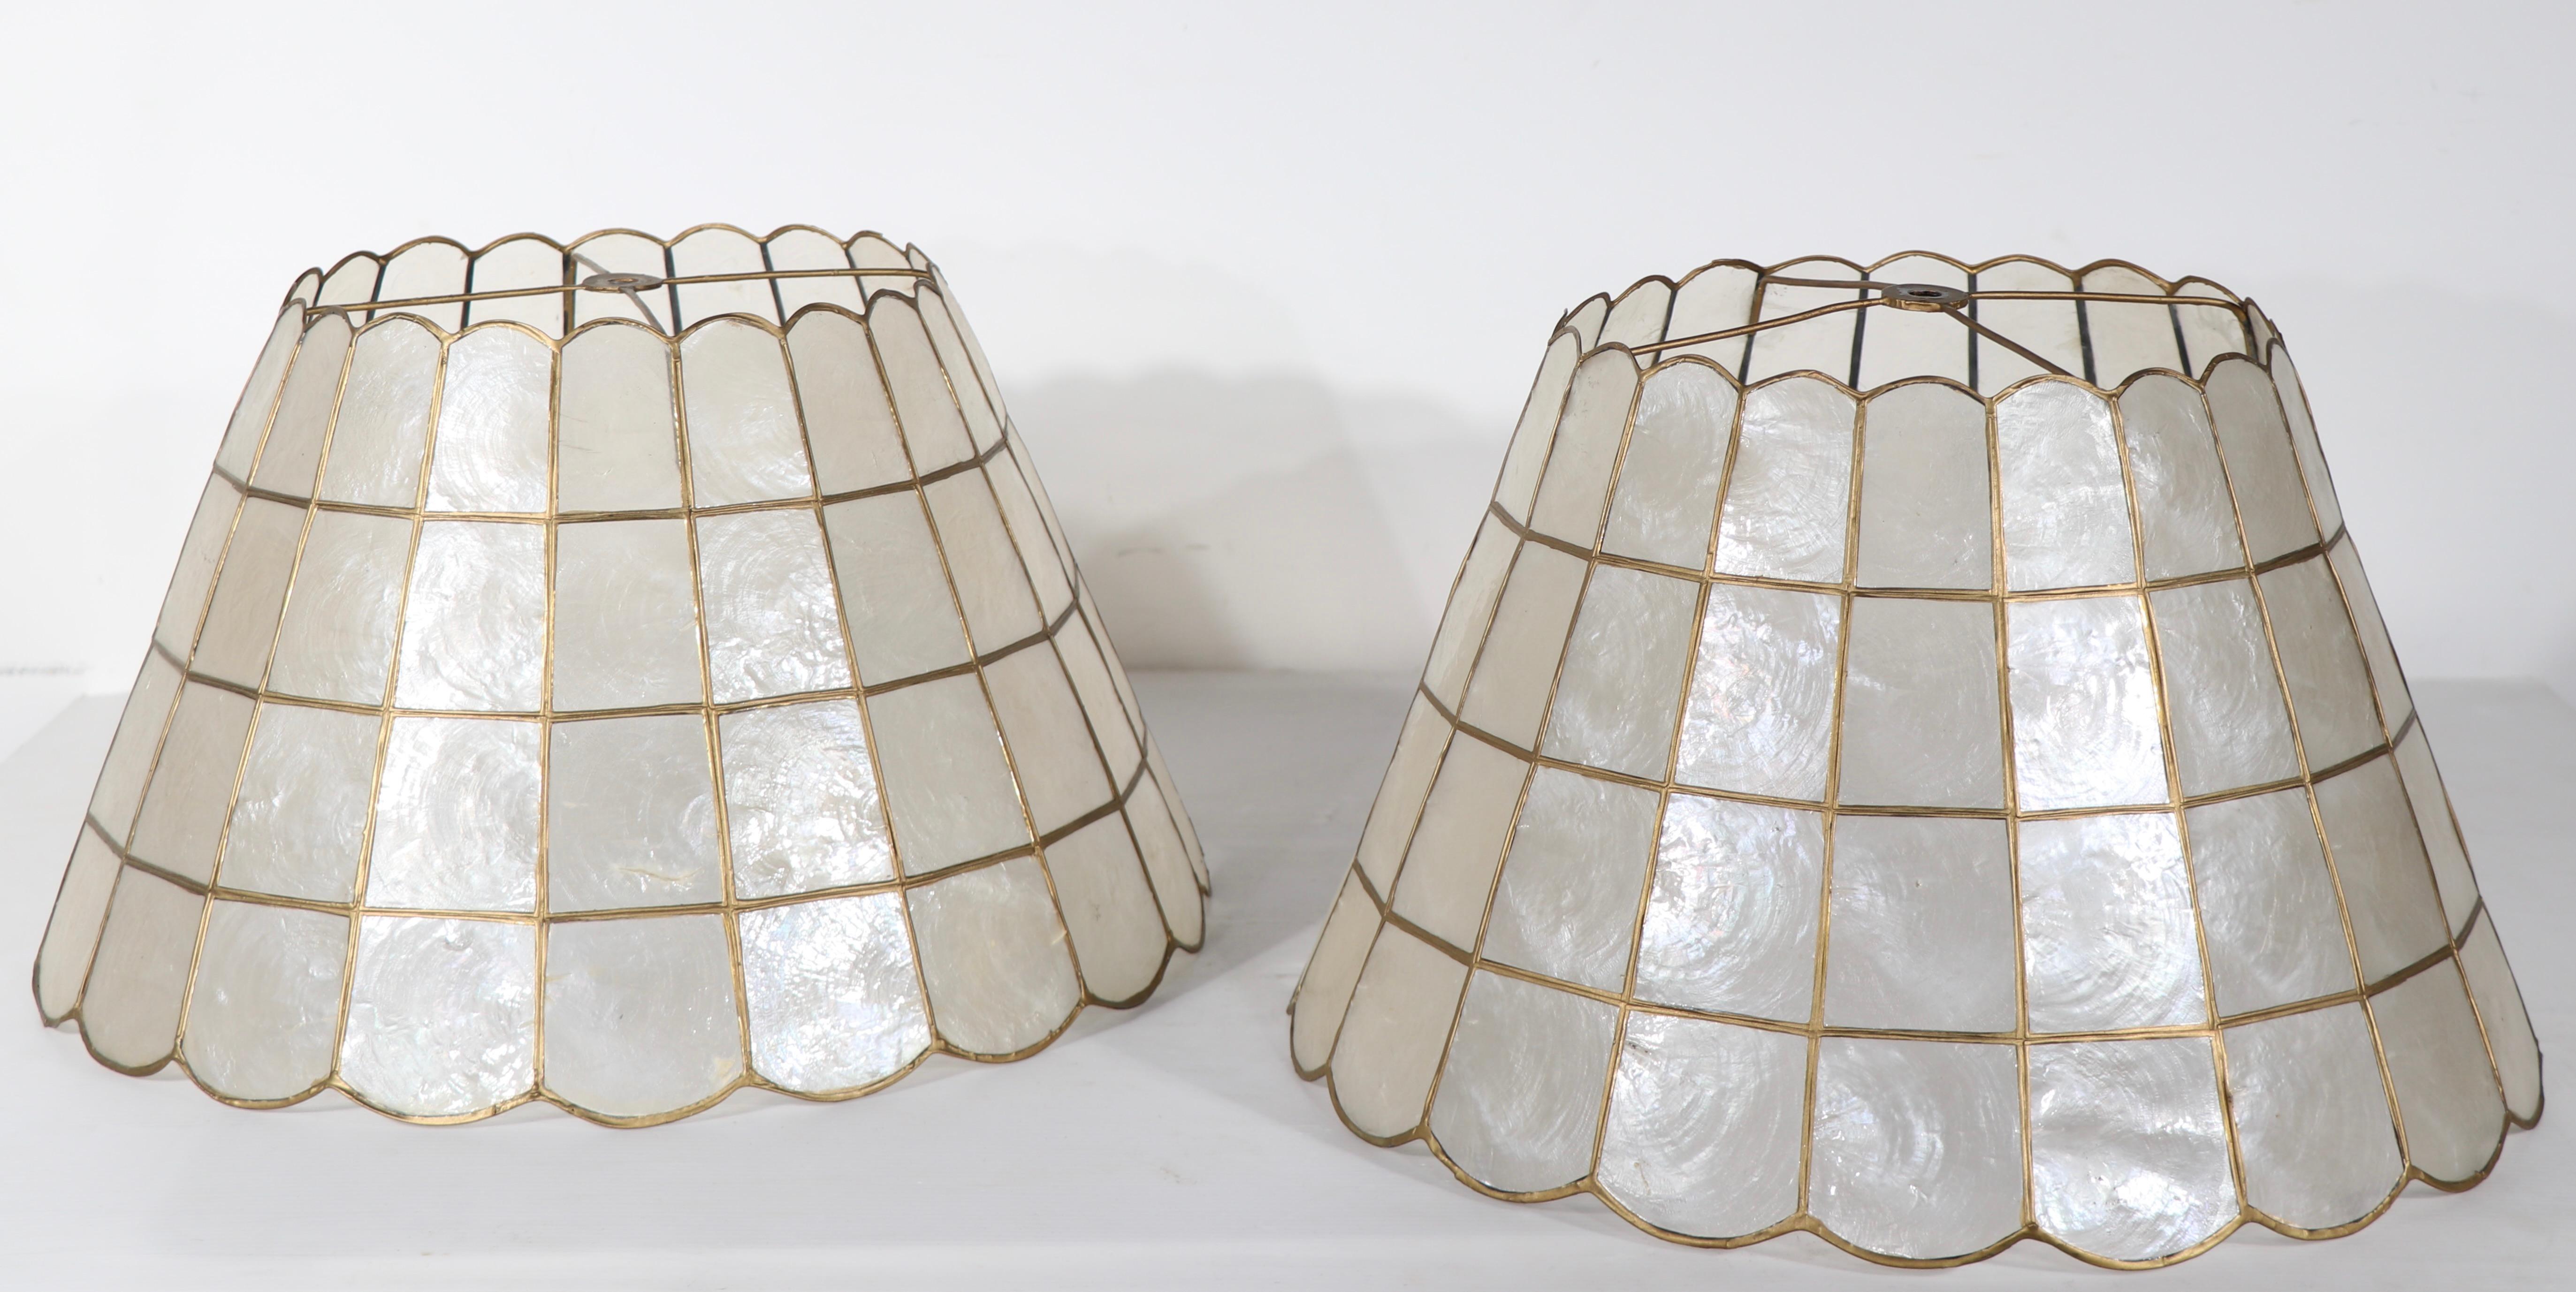 Pair of vintage Capiz Shell lamp shades, both are in good, clean, ready to use condition, showing only light wear, normal and consistent with age. Hard to find these nice shades in good condition, much harder to find them in pairs. Suitable for